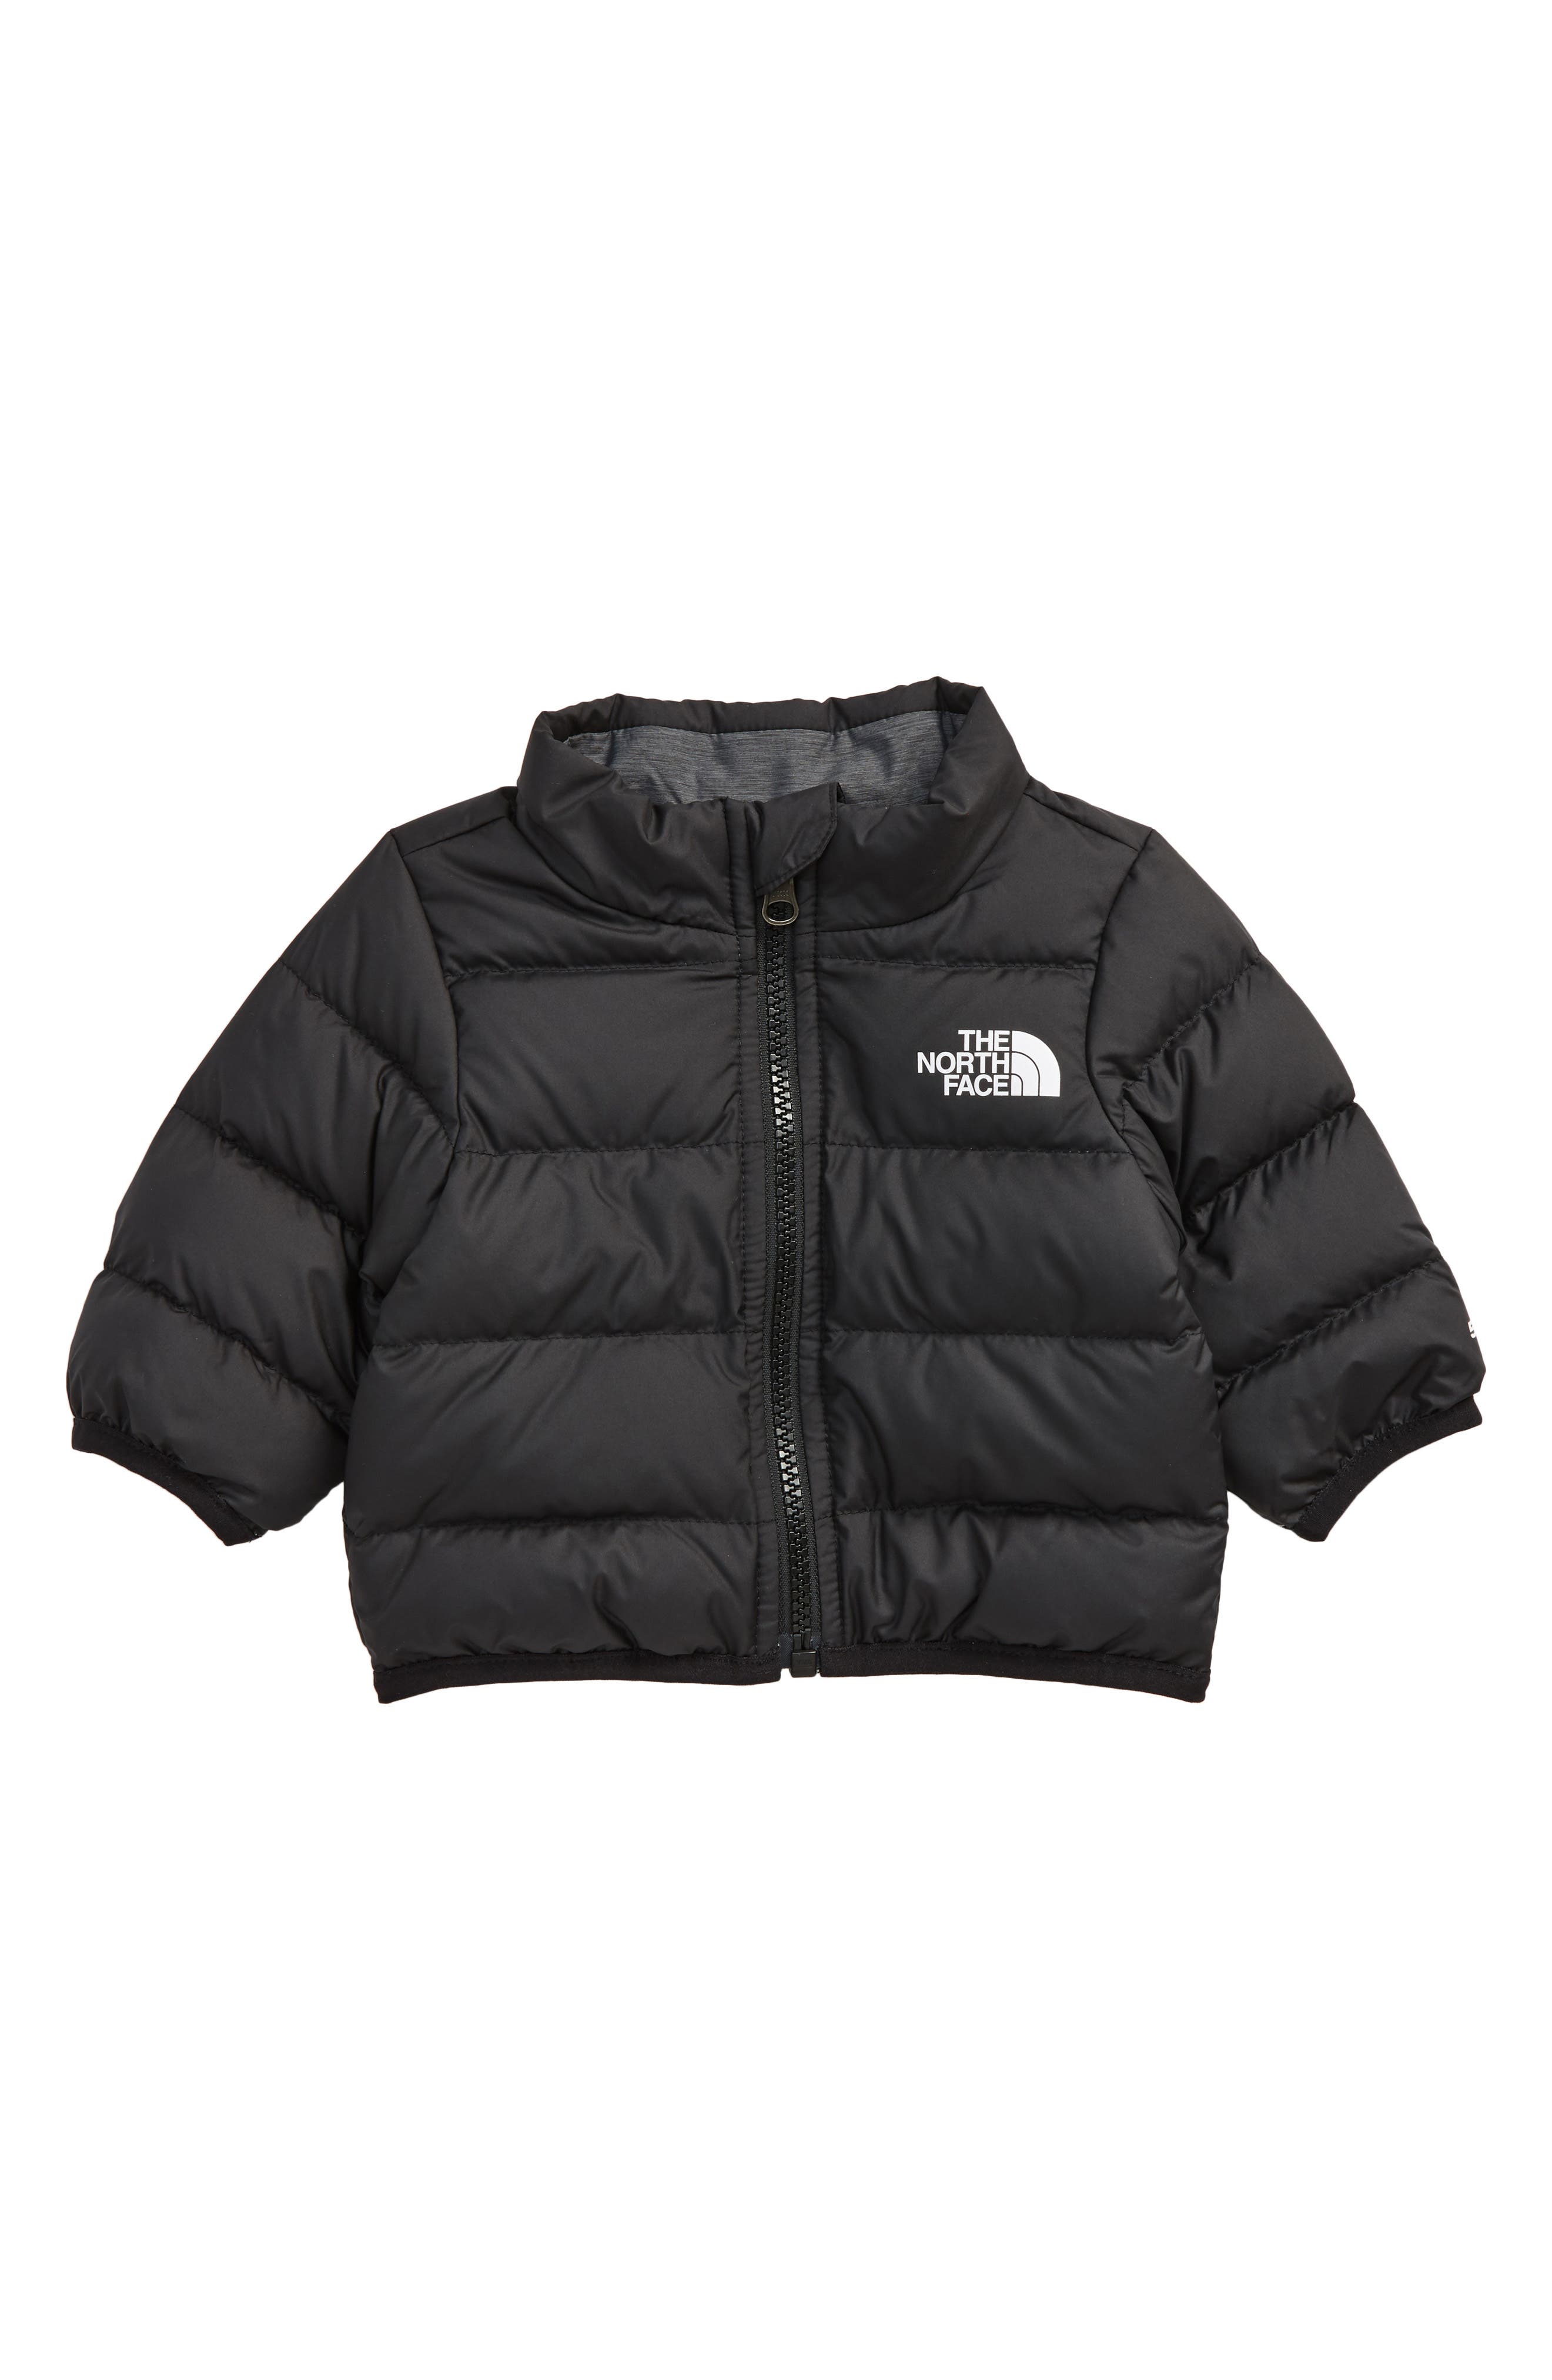 baby girl winter coats north face